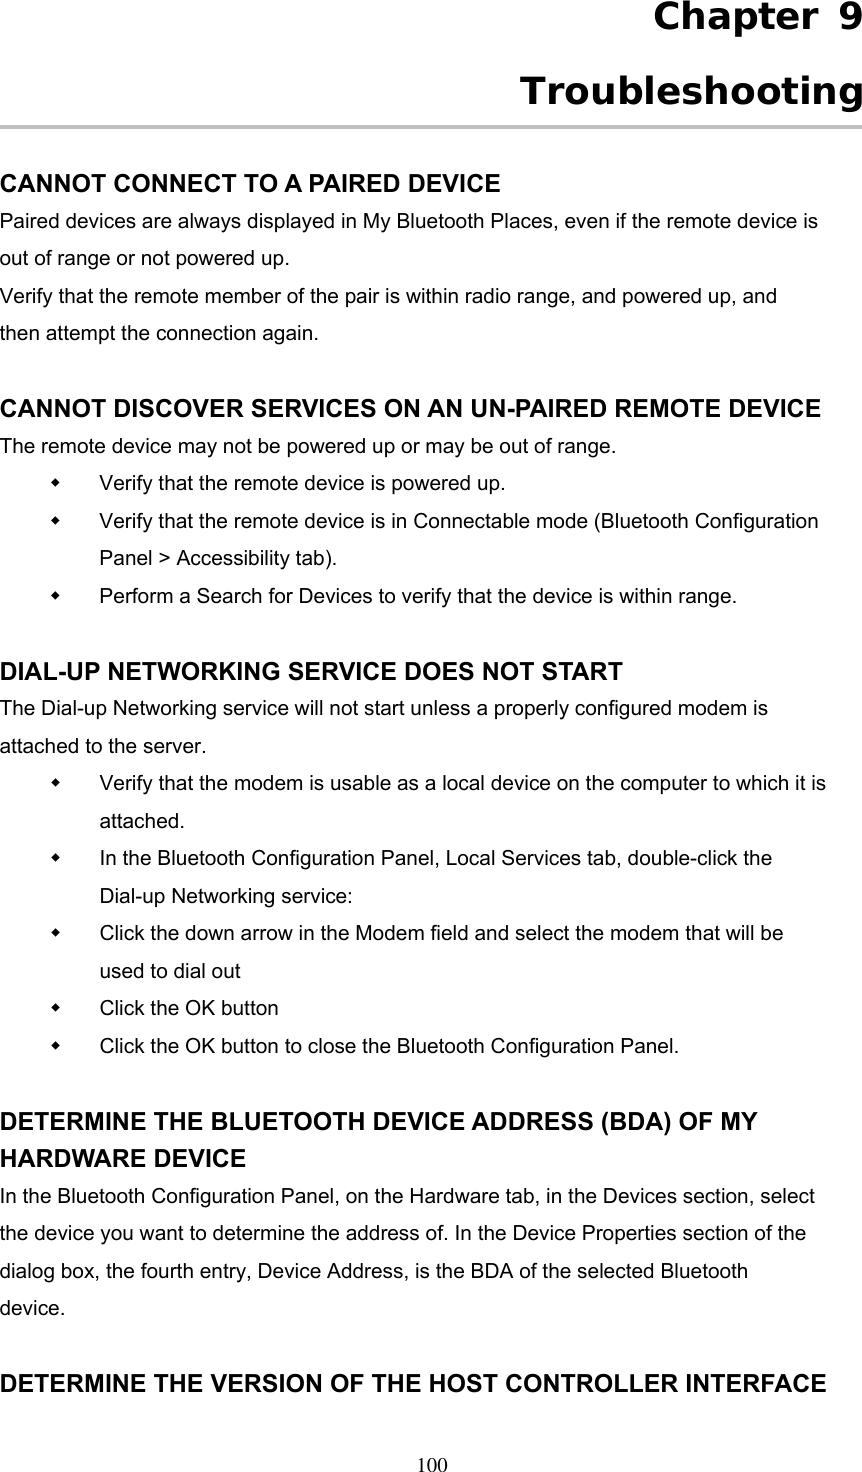 Chapter 9 Troubleshooting  CANNOT CONNECT TO A PAIRED DEVICE Paired devices are always displayed in My Bluetooth Places, even if the remote device is out of range or not powered up. Verify that the remote member of the pair is within radio range, and powered up, and then attempt the connection again.  CANNOT DISCOVER SERVICES ON AN UN-PAIRED REMOTE DEVICE The remote device may not be powered up or may be out of range.   Verify that the remote device is powered up.   Verify that the remote device is in Connectable mode (Bluetooth Configuration Panel &gt; Accessibility tab).   Perform a Search for Devices to verify that the device is within range.  DIAL-UP NETWORKING SERVICE DOES NOT START The Dial-up Networking service will not start unless a properly configured modem is attached to the server.   Verify that the modem is usable as a local device on the computer to which it is attached.   In the Bluetooth Configuration Panel, Local Services tab, double-click the Dial-up Networking service:   Click the down arrow in the Modem field and select the modem that will be used to dial out   Click the OK button   Click the OK button to close the Bluetooth Configuration Panel.  DETERMINE THE BLUETOOTH DEVICE ADDRESS (BDA) OF MY HARDWARE DEVICE In the Bluetooth Configuration Panel, on the Hardware tab, in the Devices section, select the device you want to determine the address of. In the Device Properties section of the dialog box, the fourth entry, Device Address, is the BDA of the selected Bluetooth device.  DETERMINE THE VERSION OF THE HOST CONTROLLER INTERFACE  100 